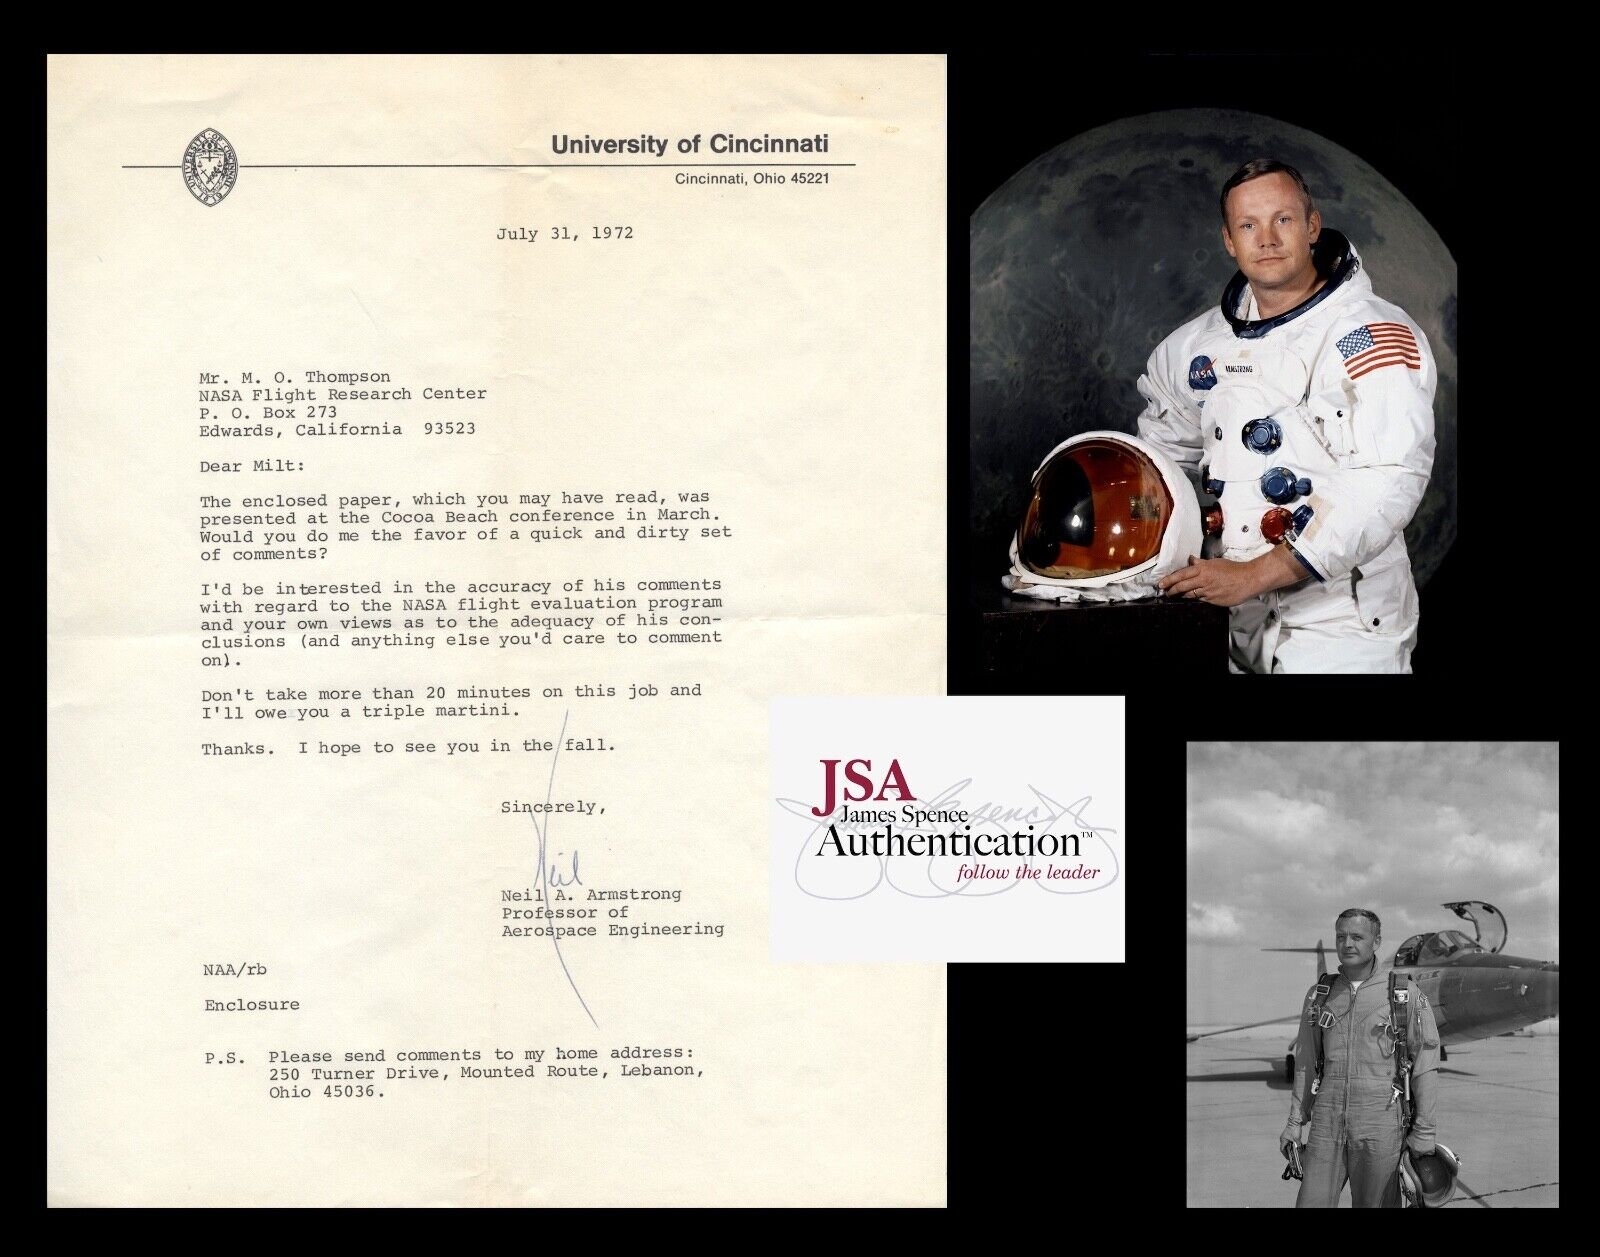 NEIL ARMSTRONG Typed Letter Signed NASA Apollo 11 Autographed Milt Thompson 1972